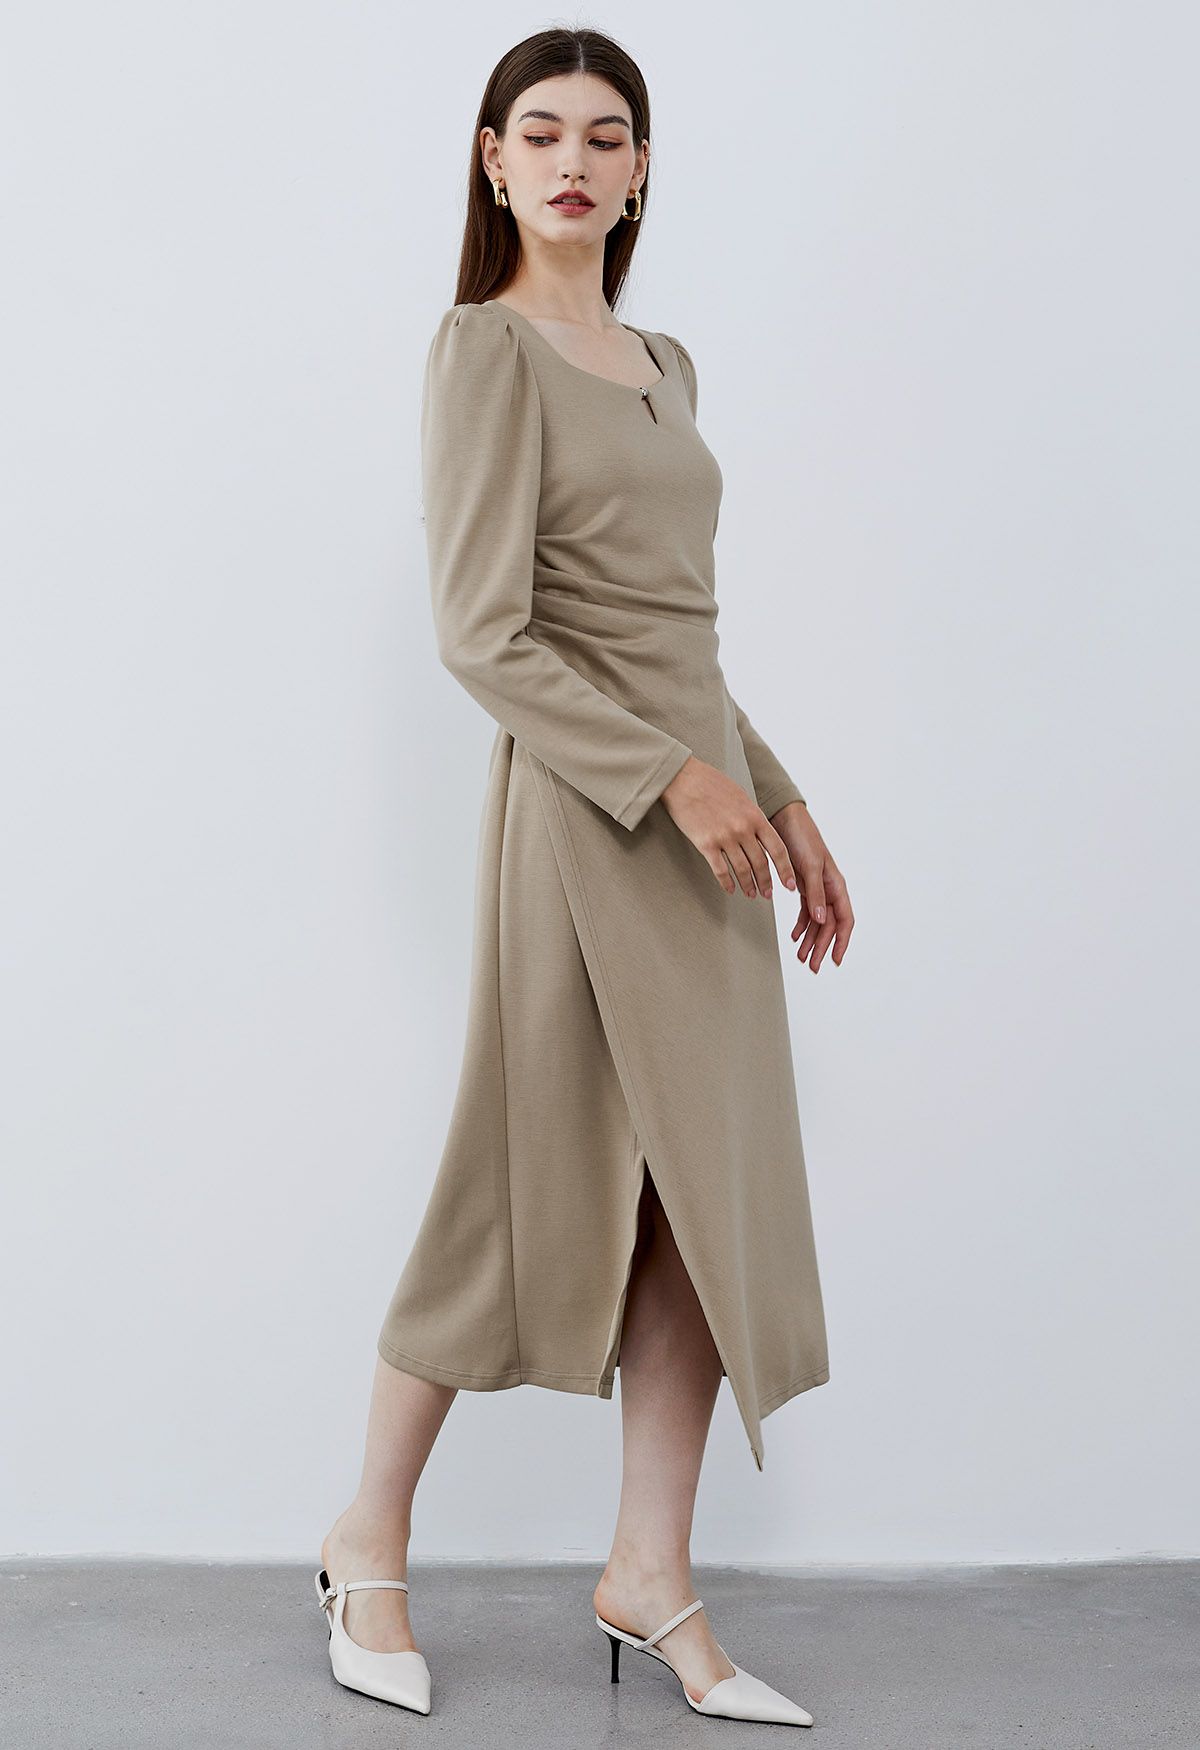 Square Neck Ruched Waist Flap Midi Dress in Tan